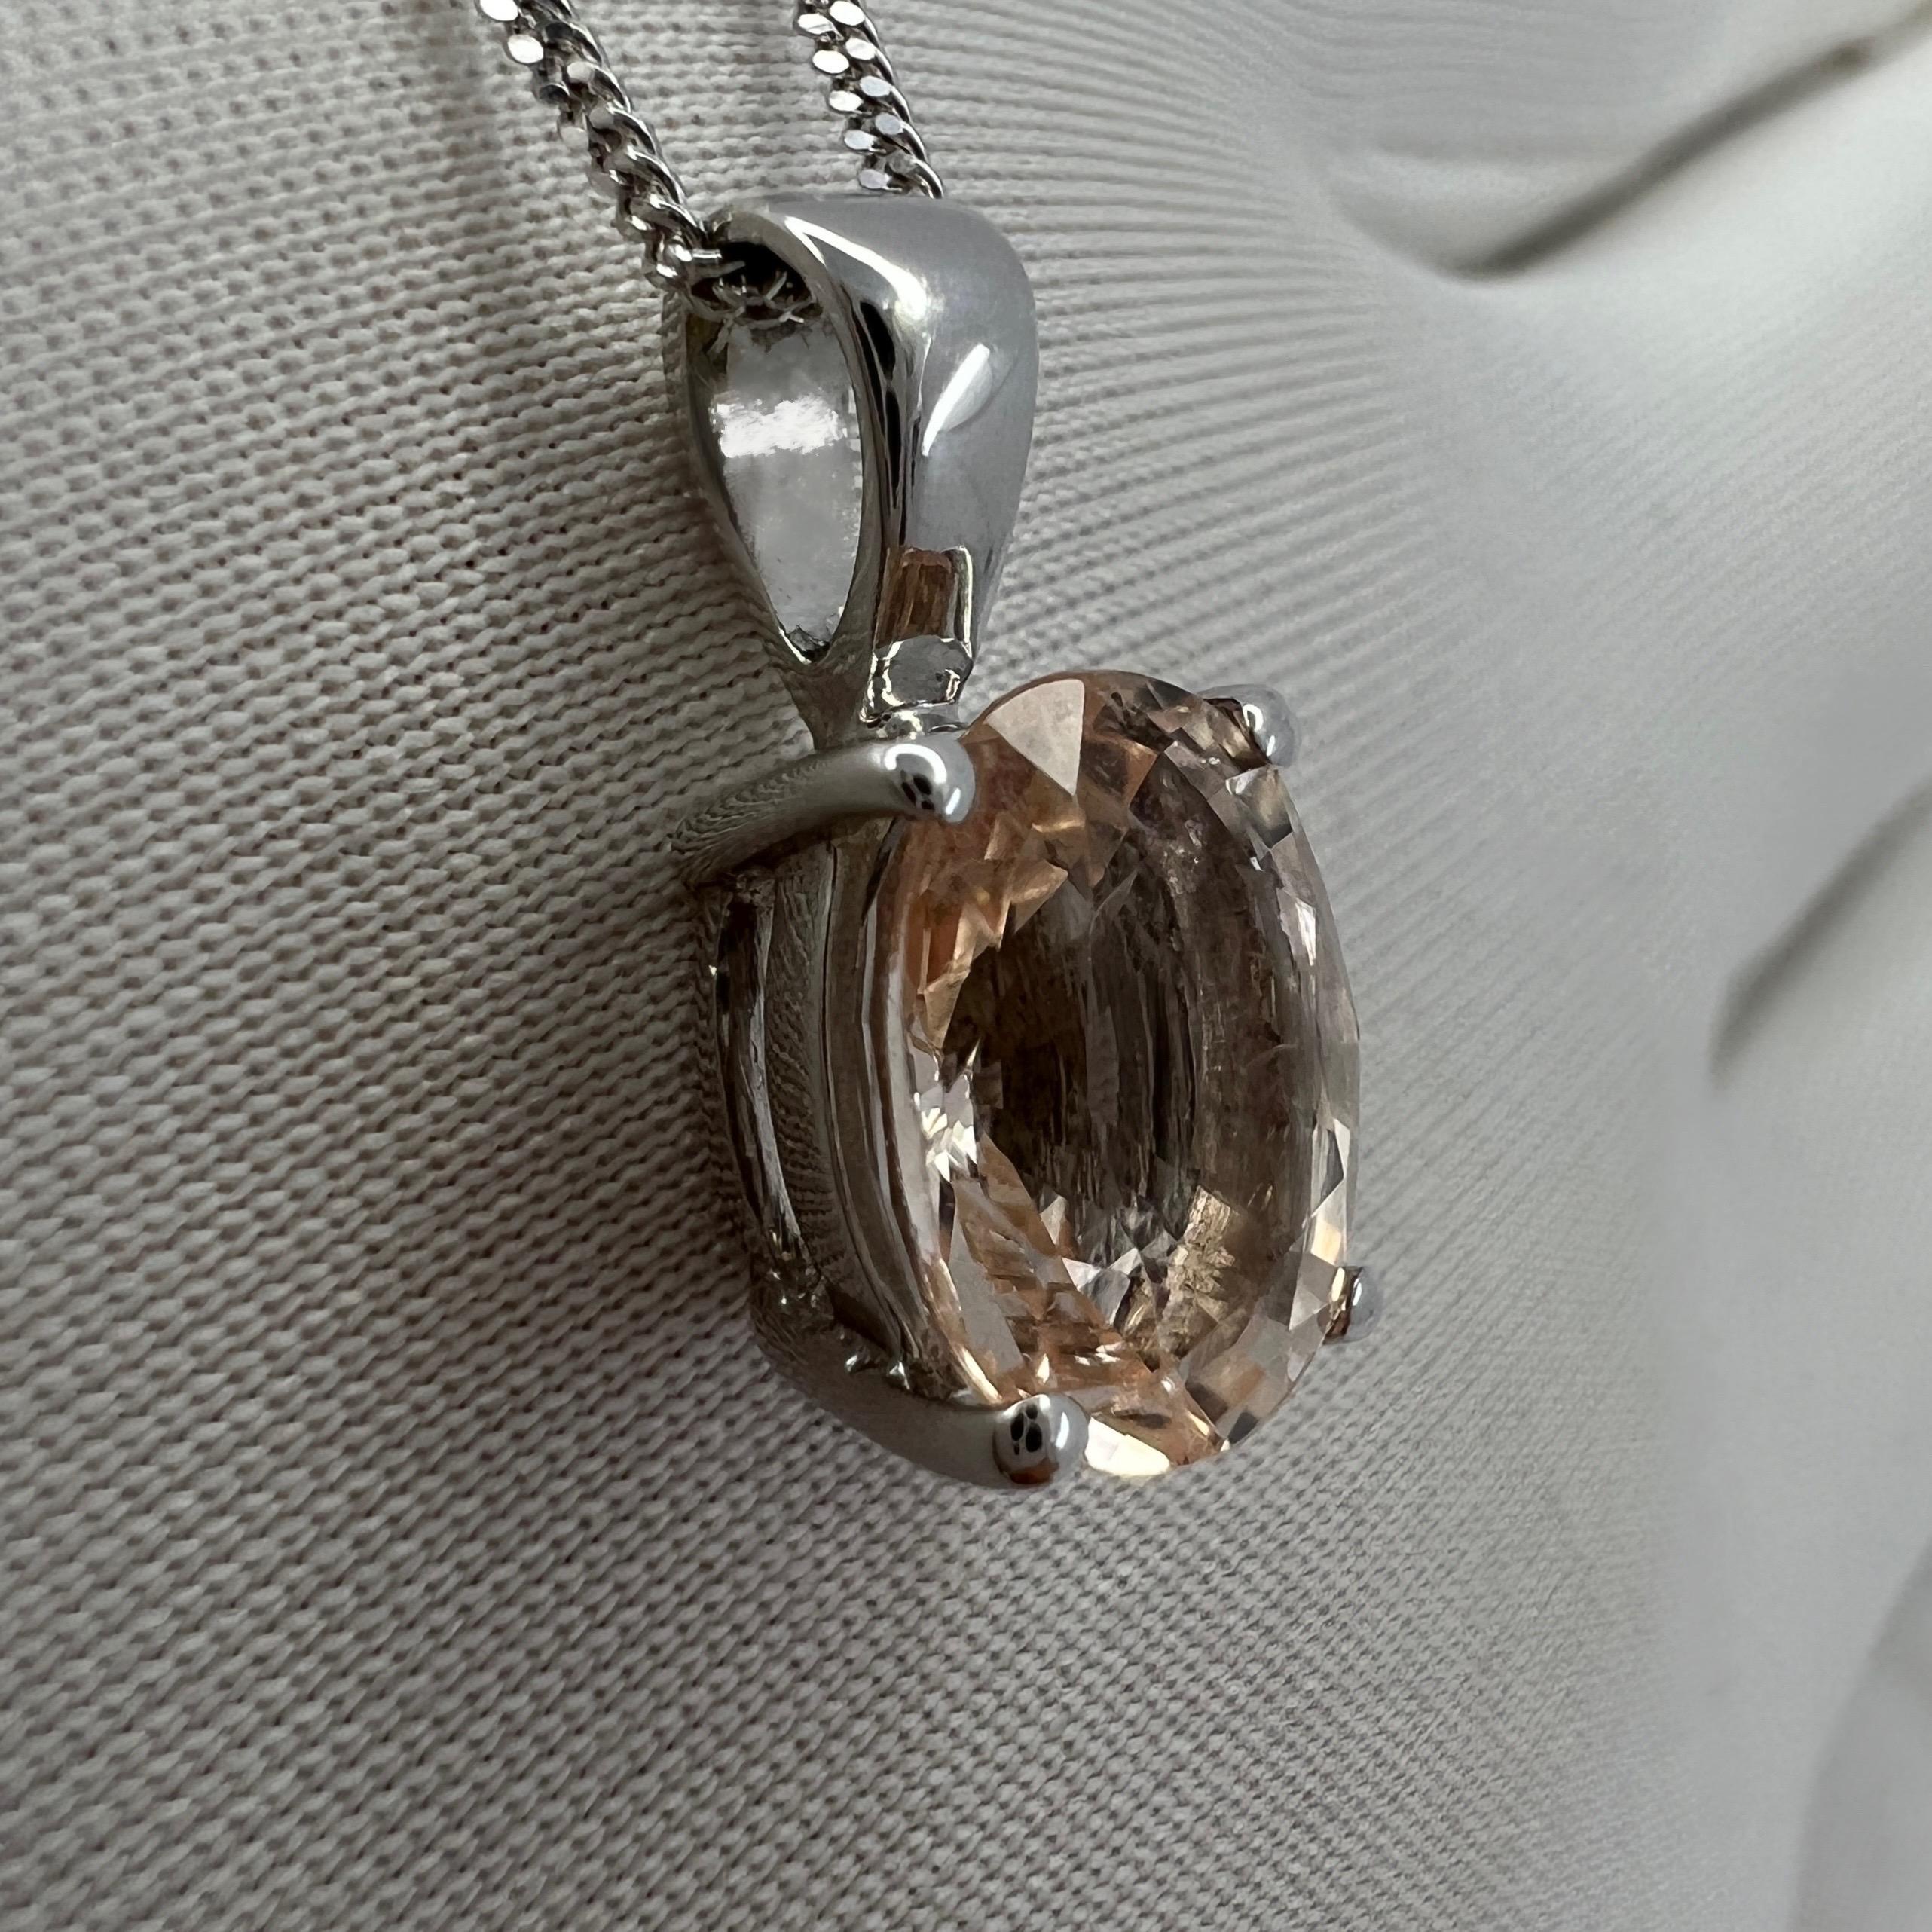 Oval Cut Morganite White Gold Solitaire Pendant Necklace.

Beautiful 1.81 carat peach pink morganite set in a fine 9k white gold solitaire pendant.
Stunning morganite with a beautiful peach pink colour and excellent clarity, some small natural